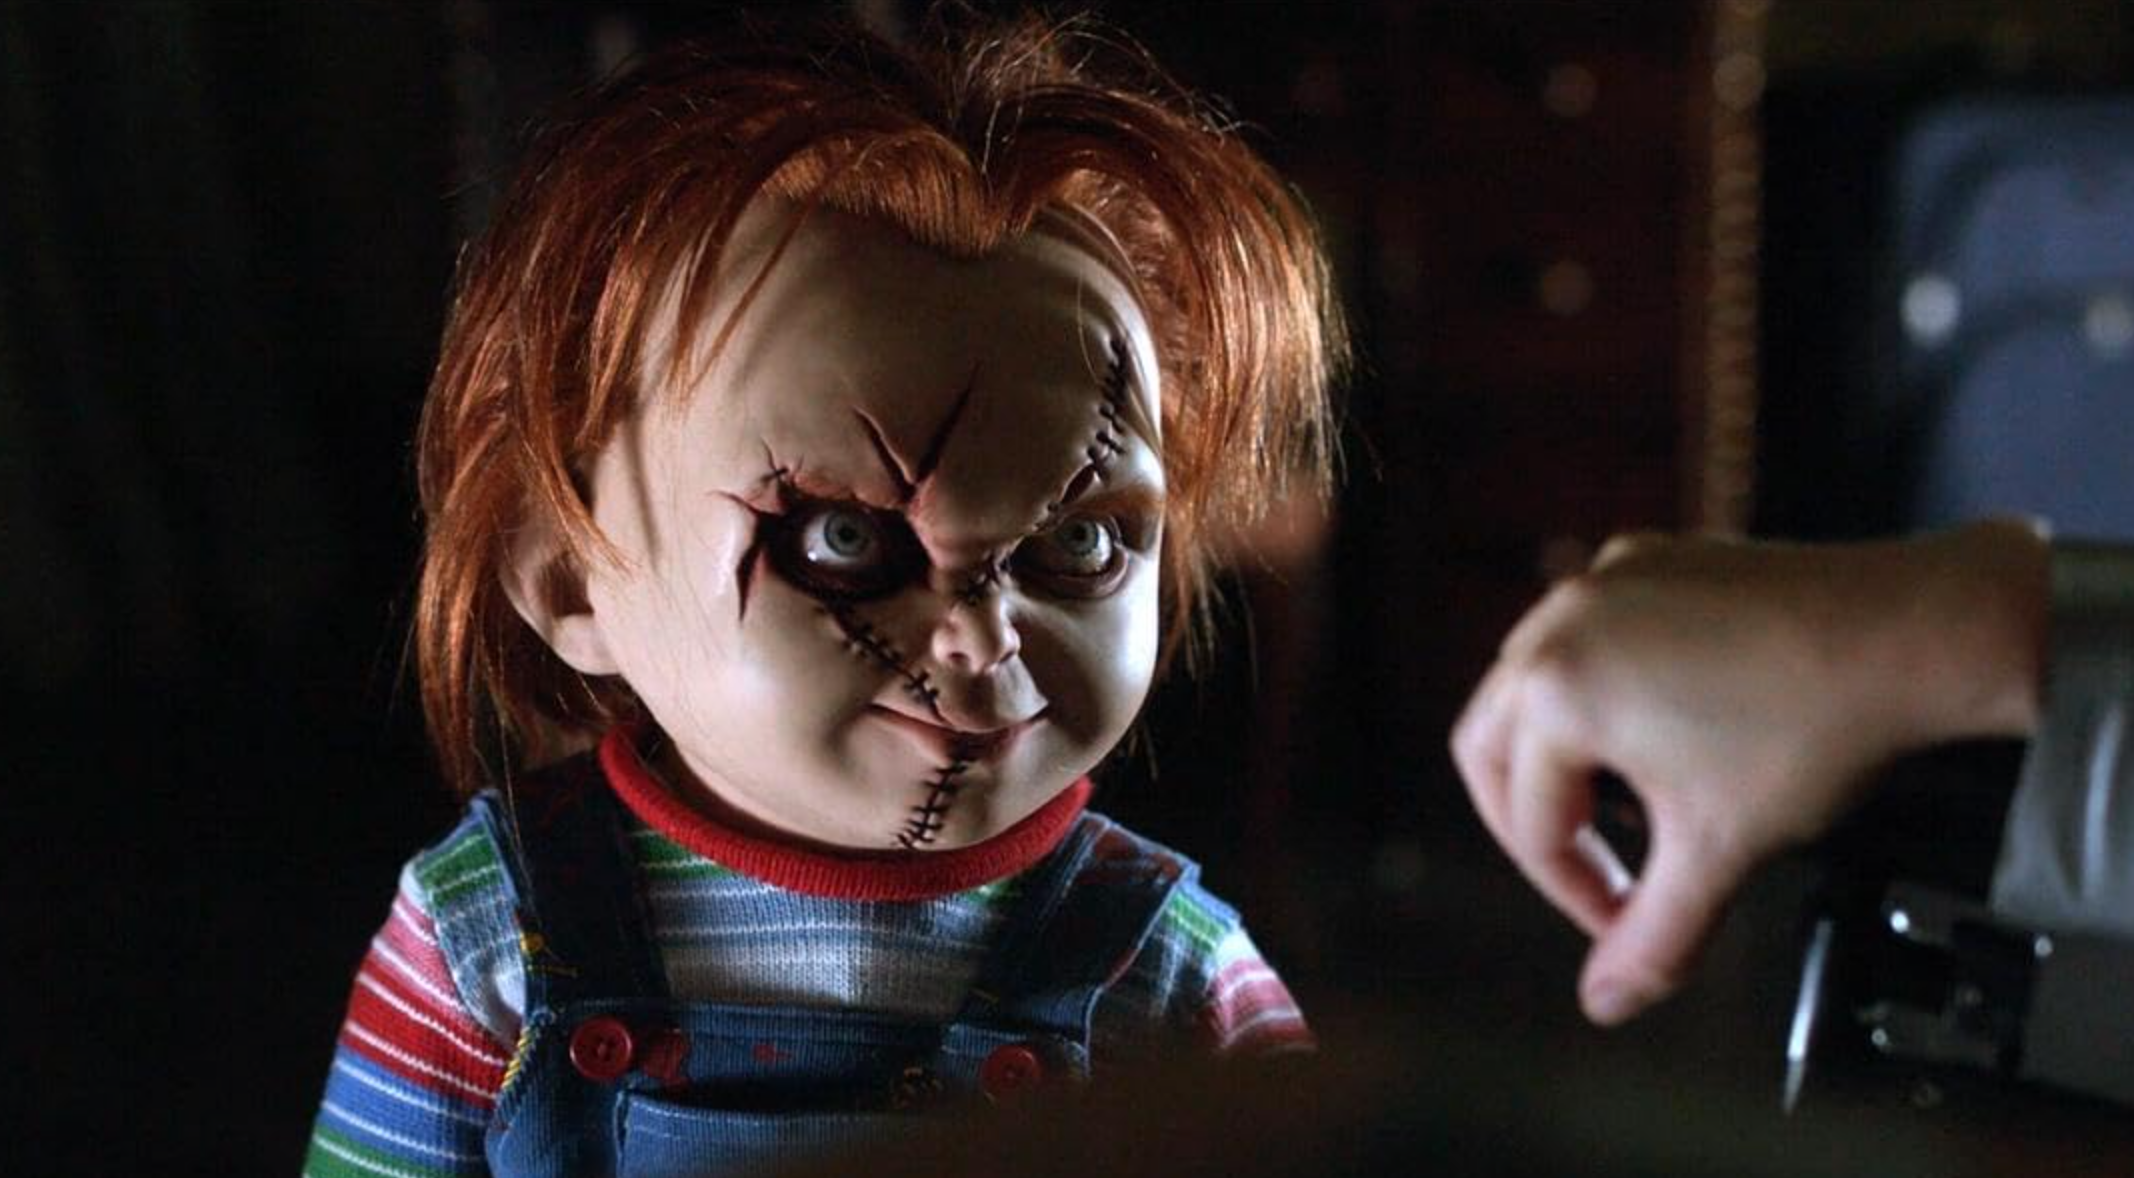 Watch Chucky Just Let Go S1 E4 | TV Shows | DIRECTV